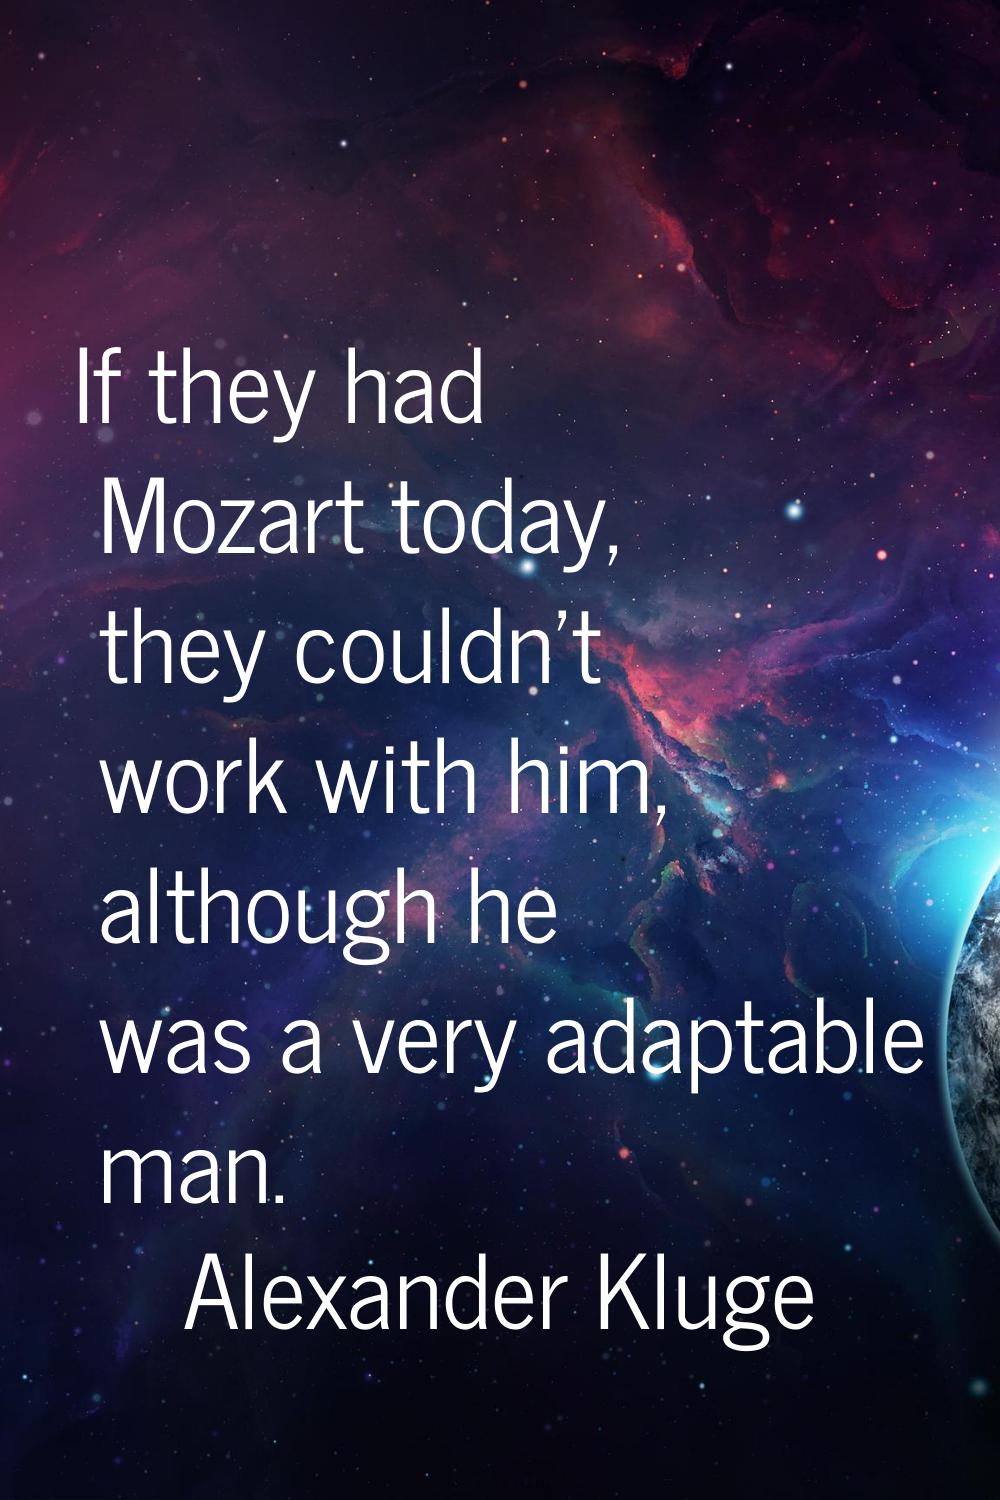 If they had Mozart today, they couldn't work with him, although he was a very adaptable man.